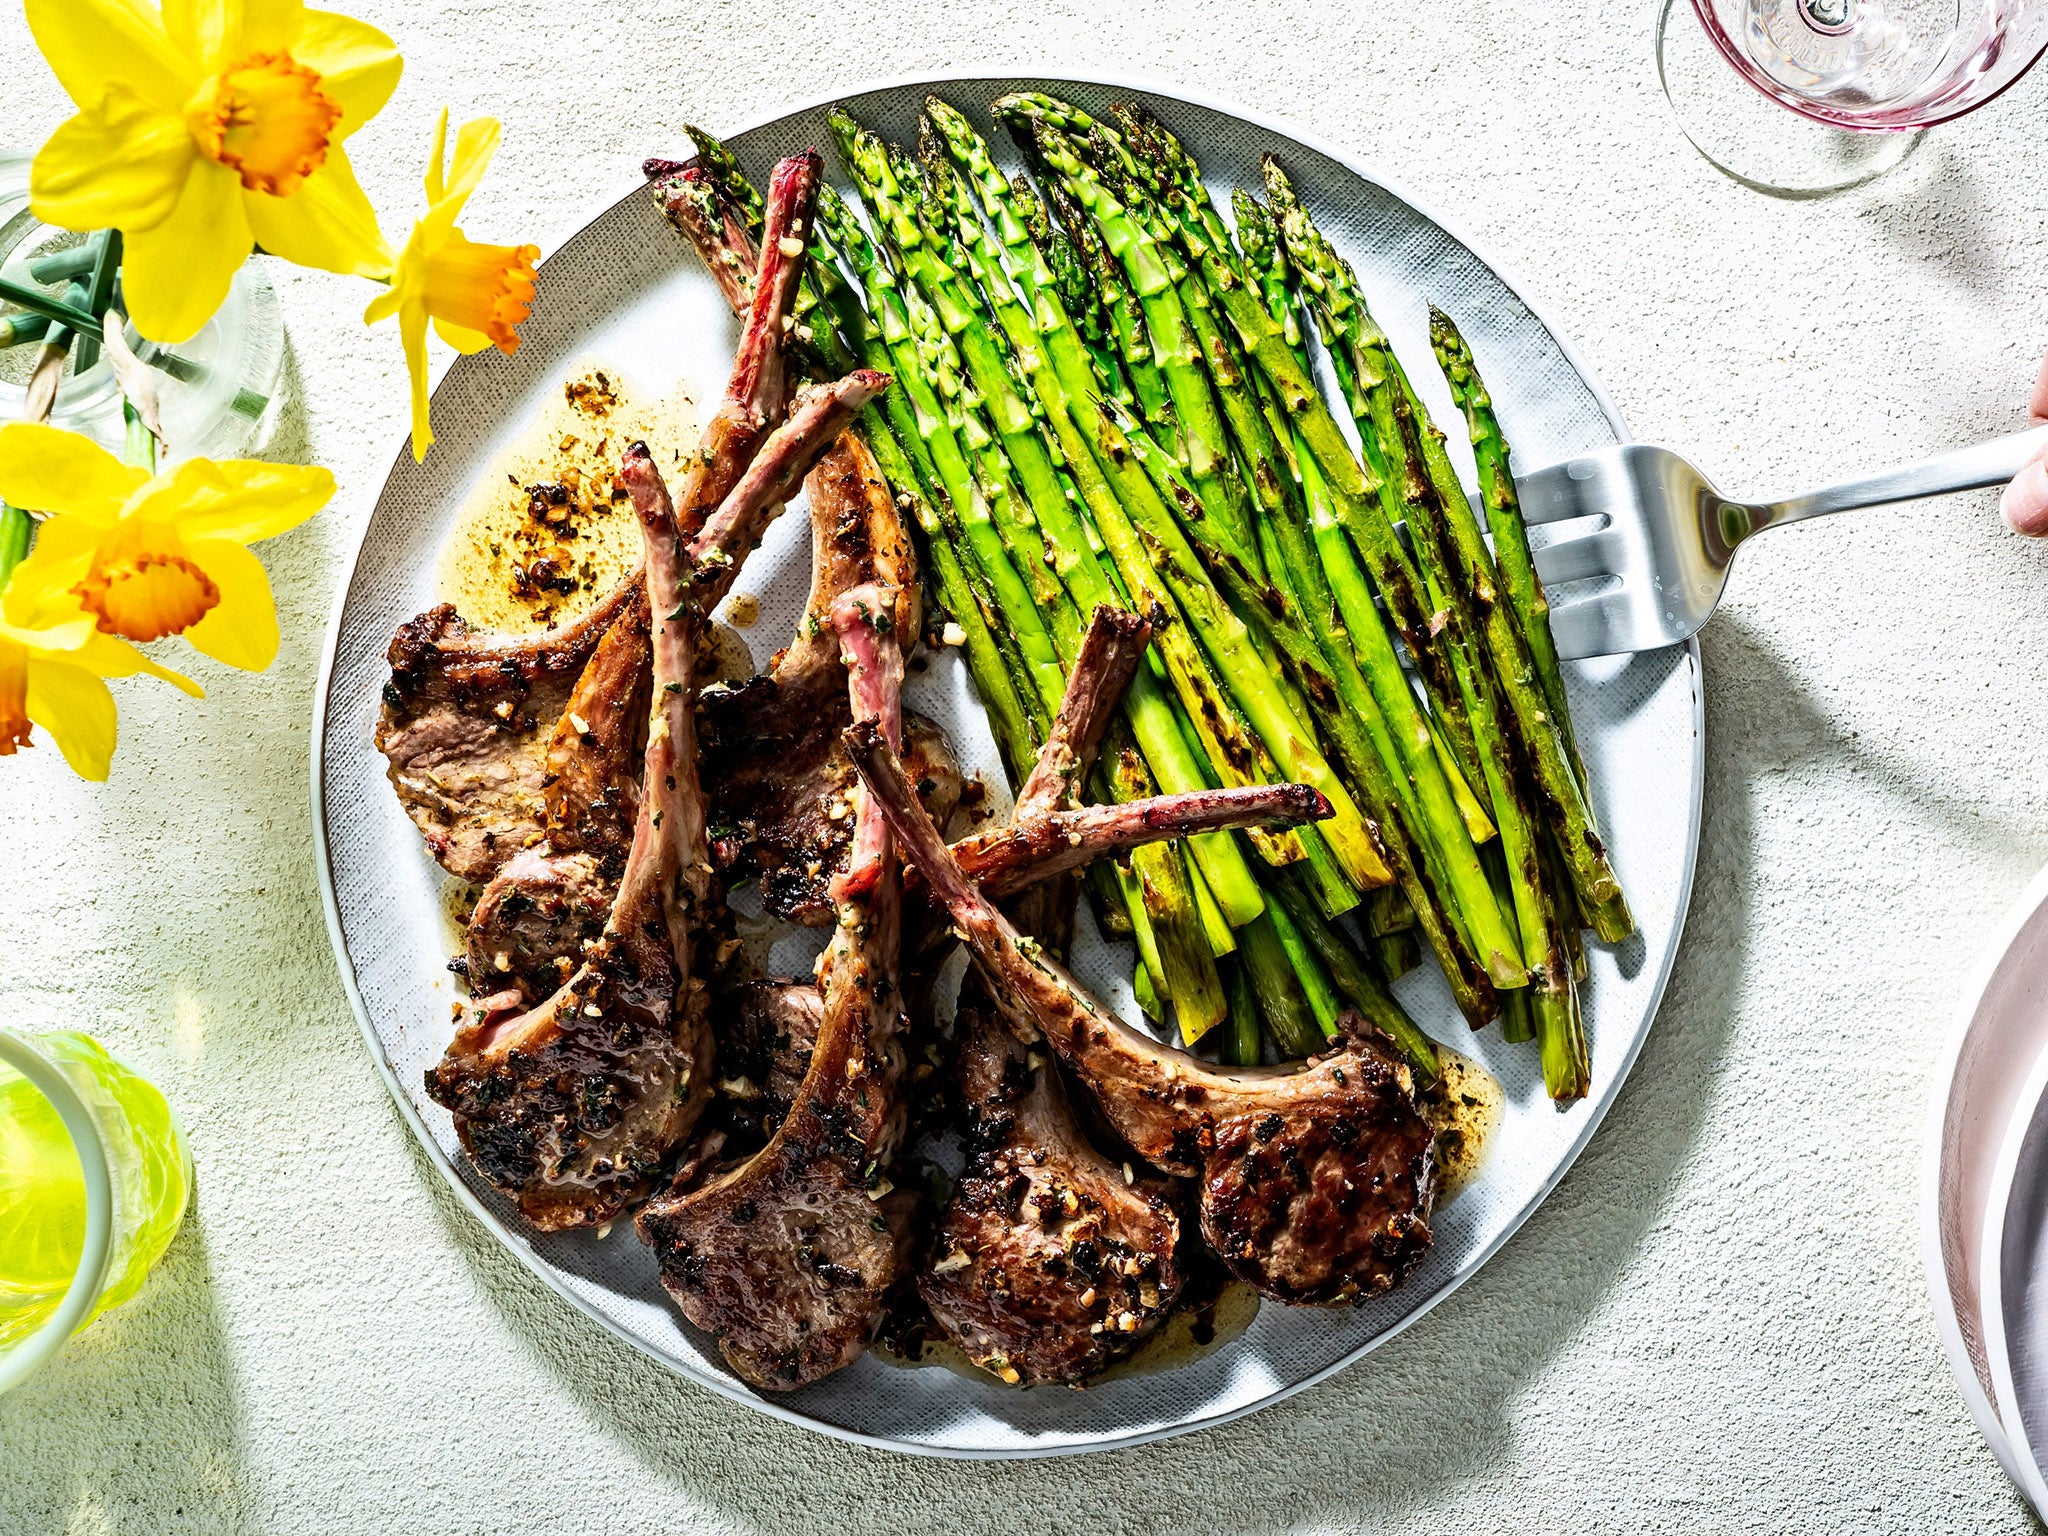 If lamb is your Easter centerpiece, consider this as an option, especially if time is tight